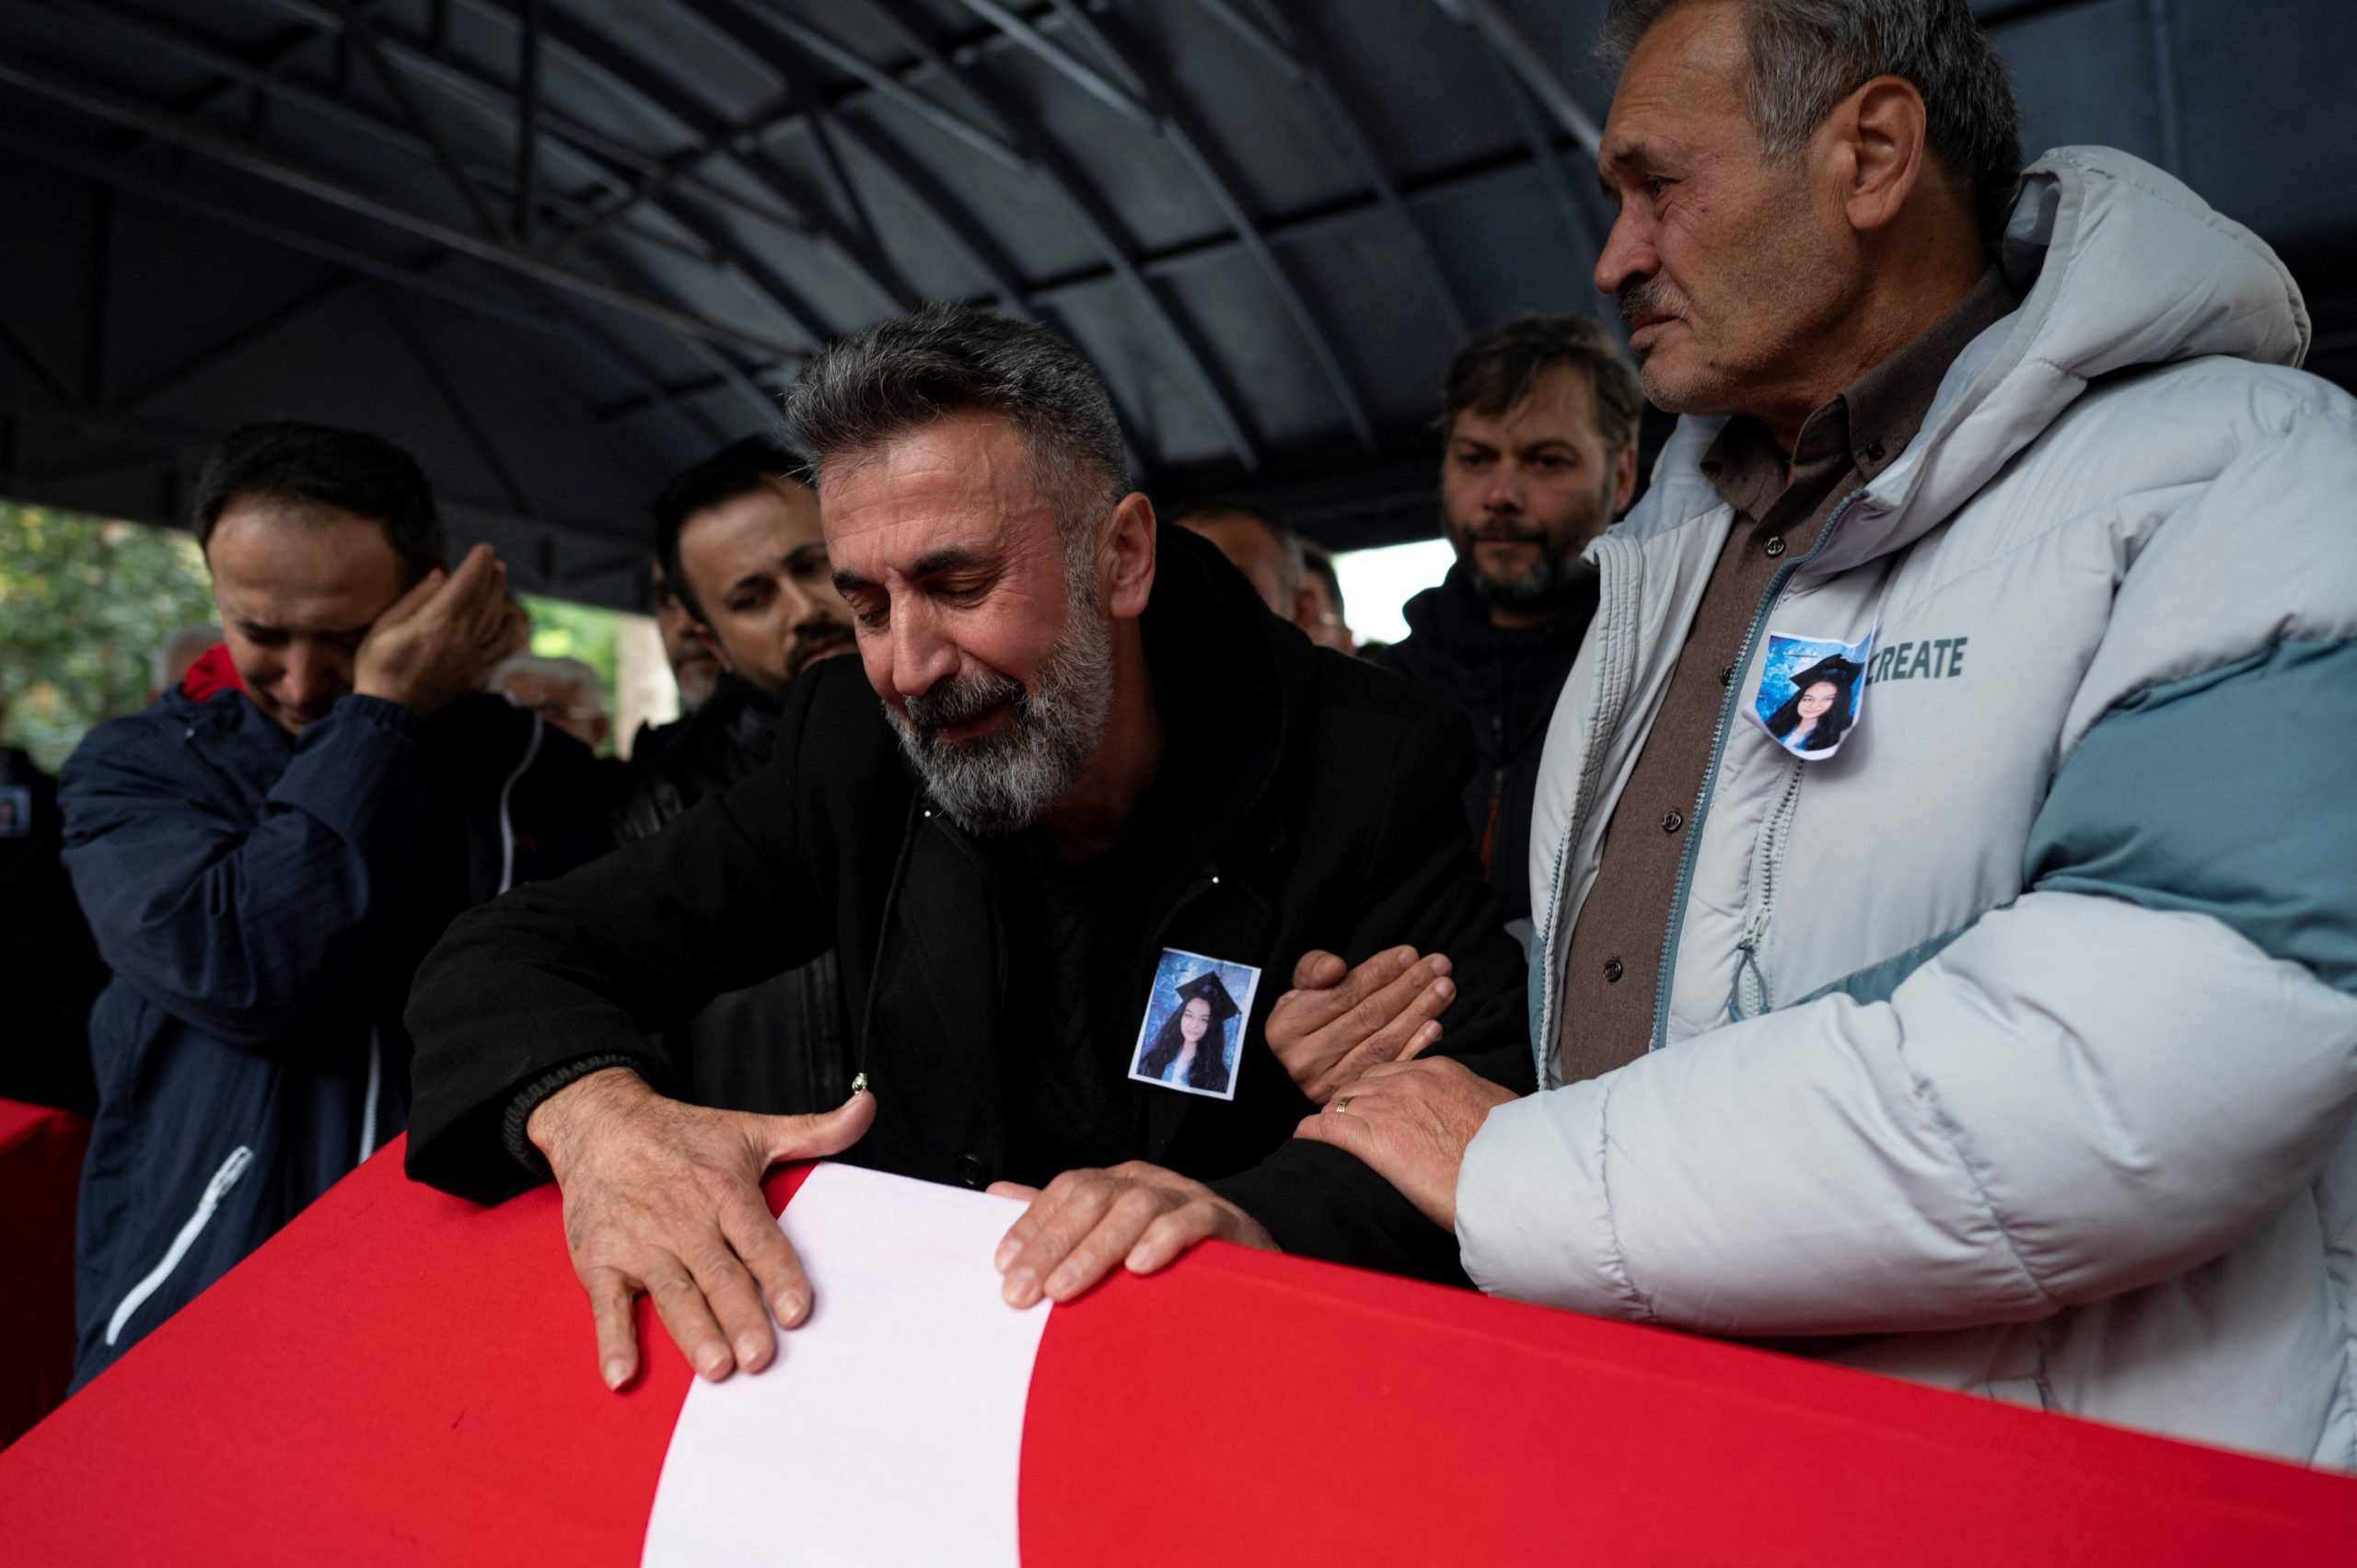 Nurettin Ucar (C) reacts during the funeral ceremony of his daughter Yagmur Ucar and ex-wife Arzu Ozsoy, who died the day before in the explosion of a bomb that killed six people in ?stanbul, on November 14, 2022. - Turkey on November 14, 2022 accused a Syrian woman of planting a bomb that killed six people in Istanbul, blaming the outlawed Kurdistan Workers' Party (PKK) of carrying out the attack. 